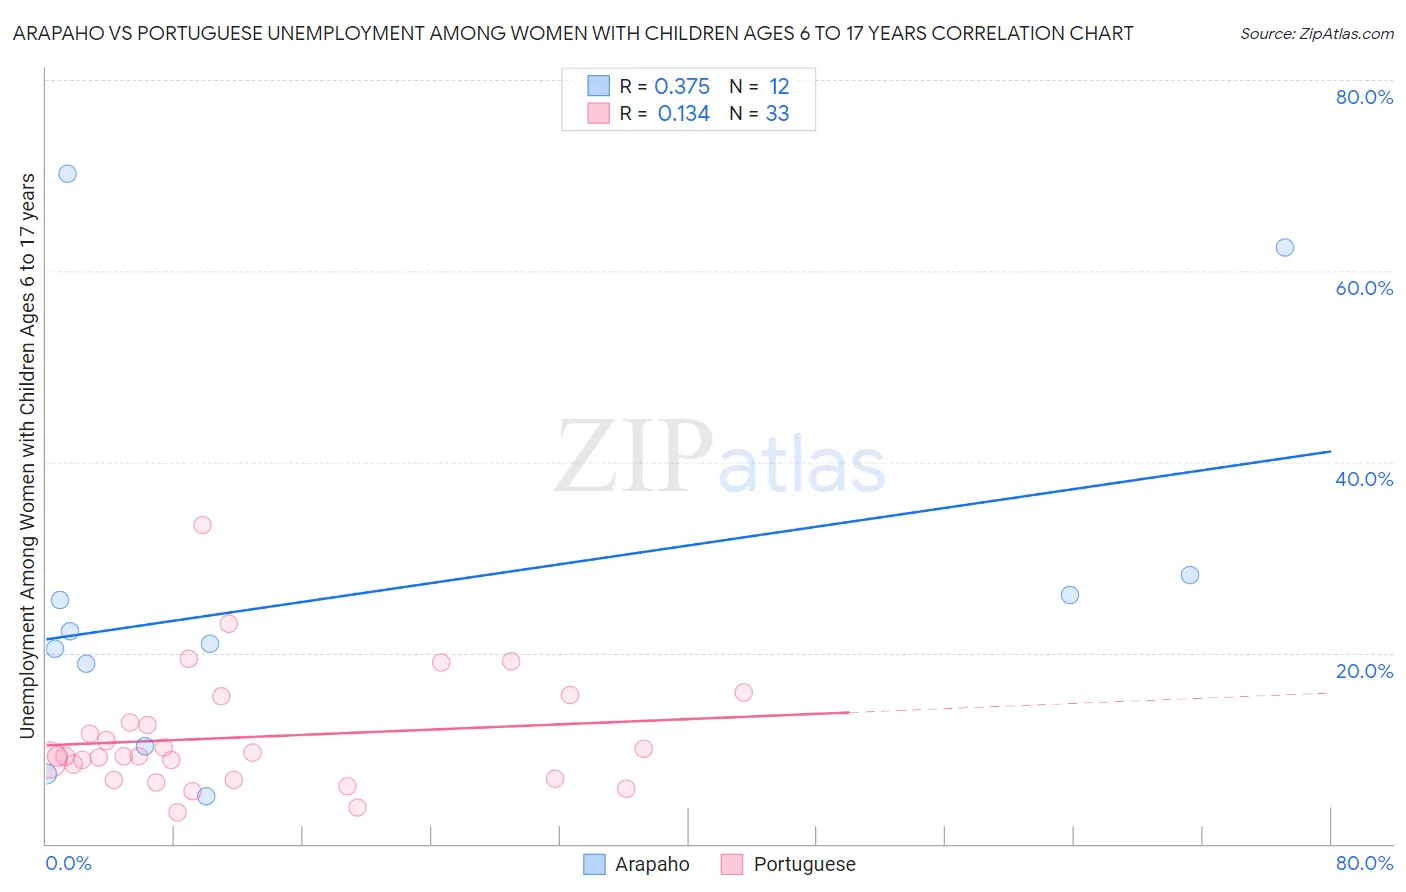 Arapaho vs Portuguese Unemployment Among Women with Children Ages 6 to 17 years